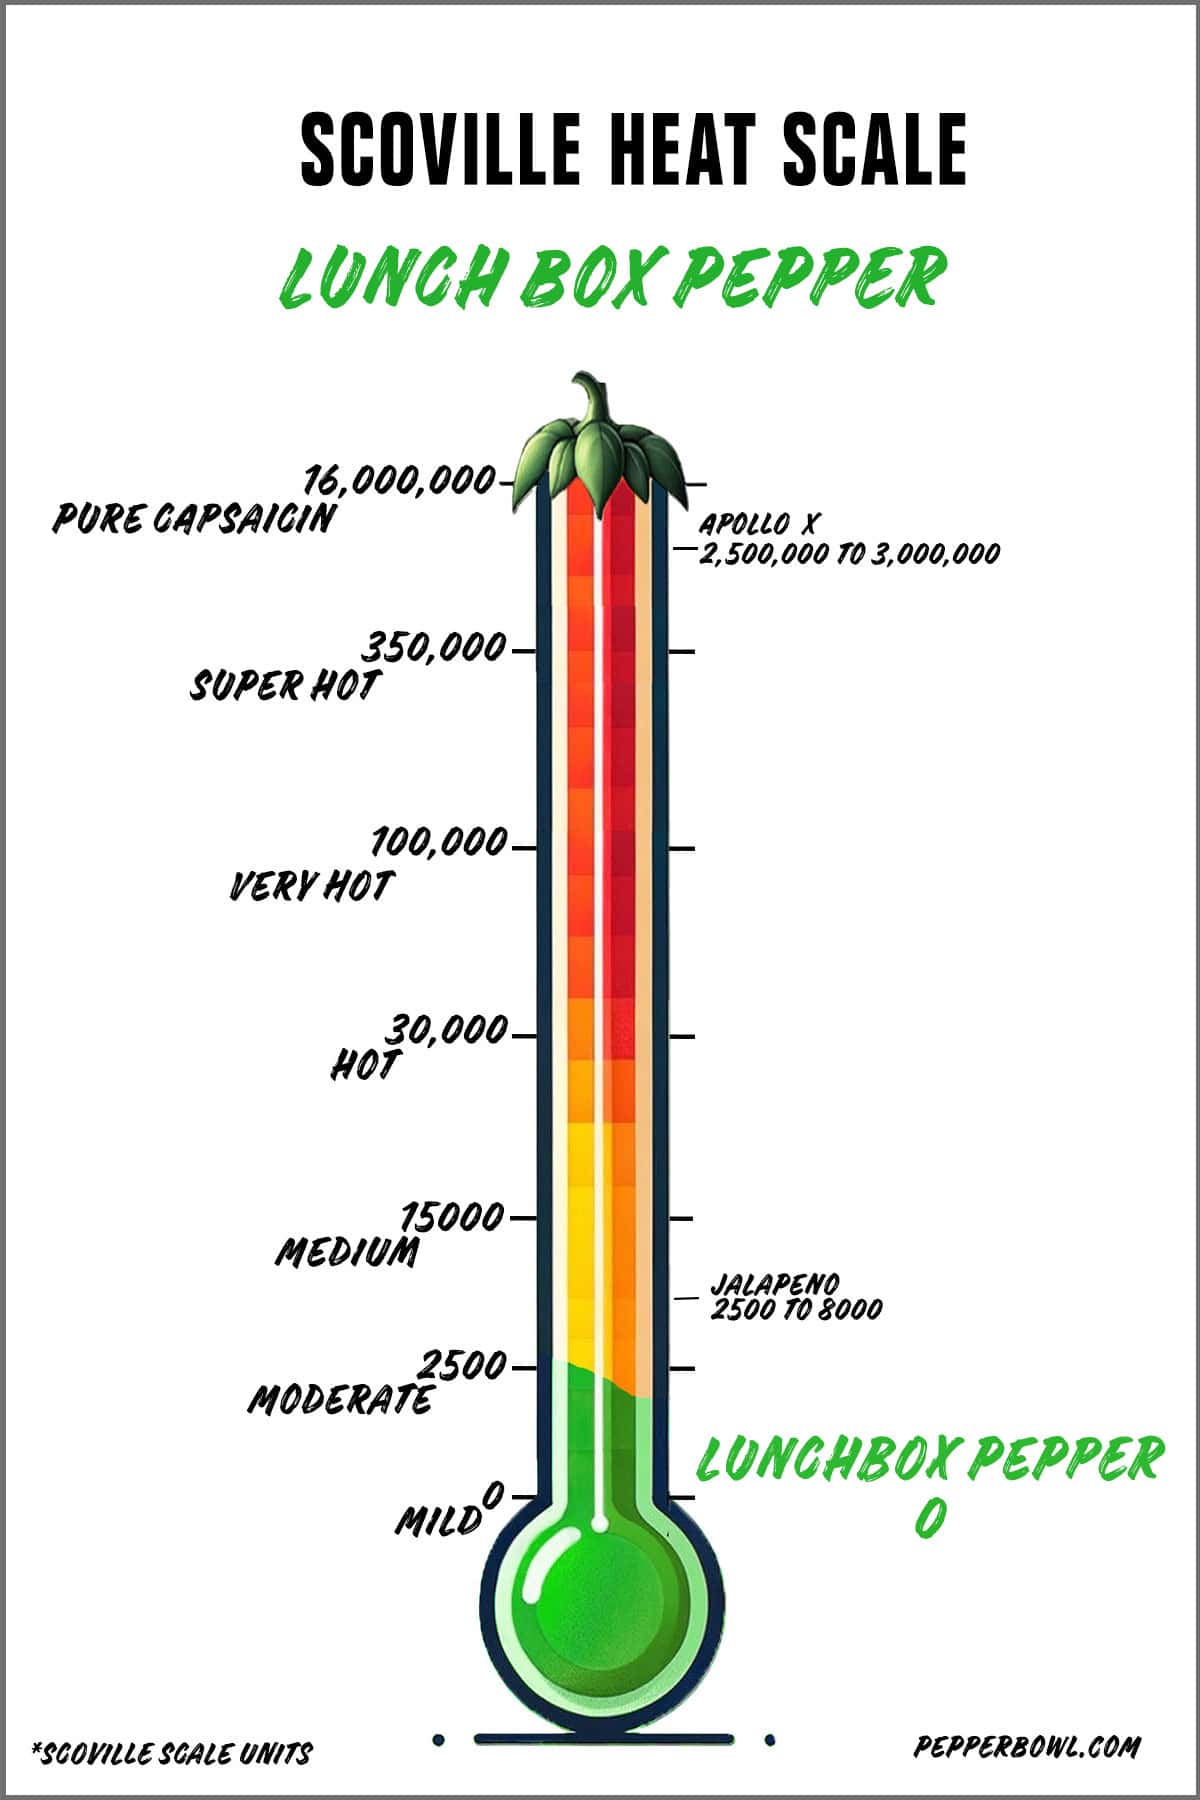 Illustration of the lunchbox pepper in the Scoville scale, representing its heat intensity.